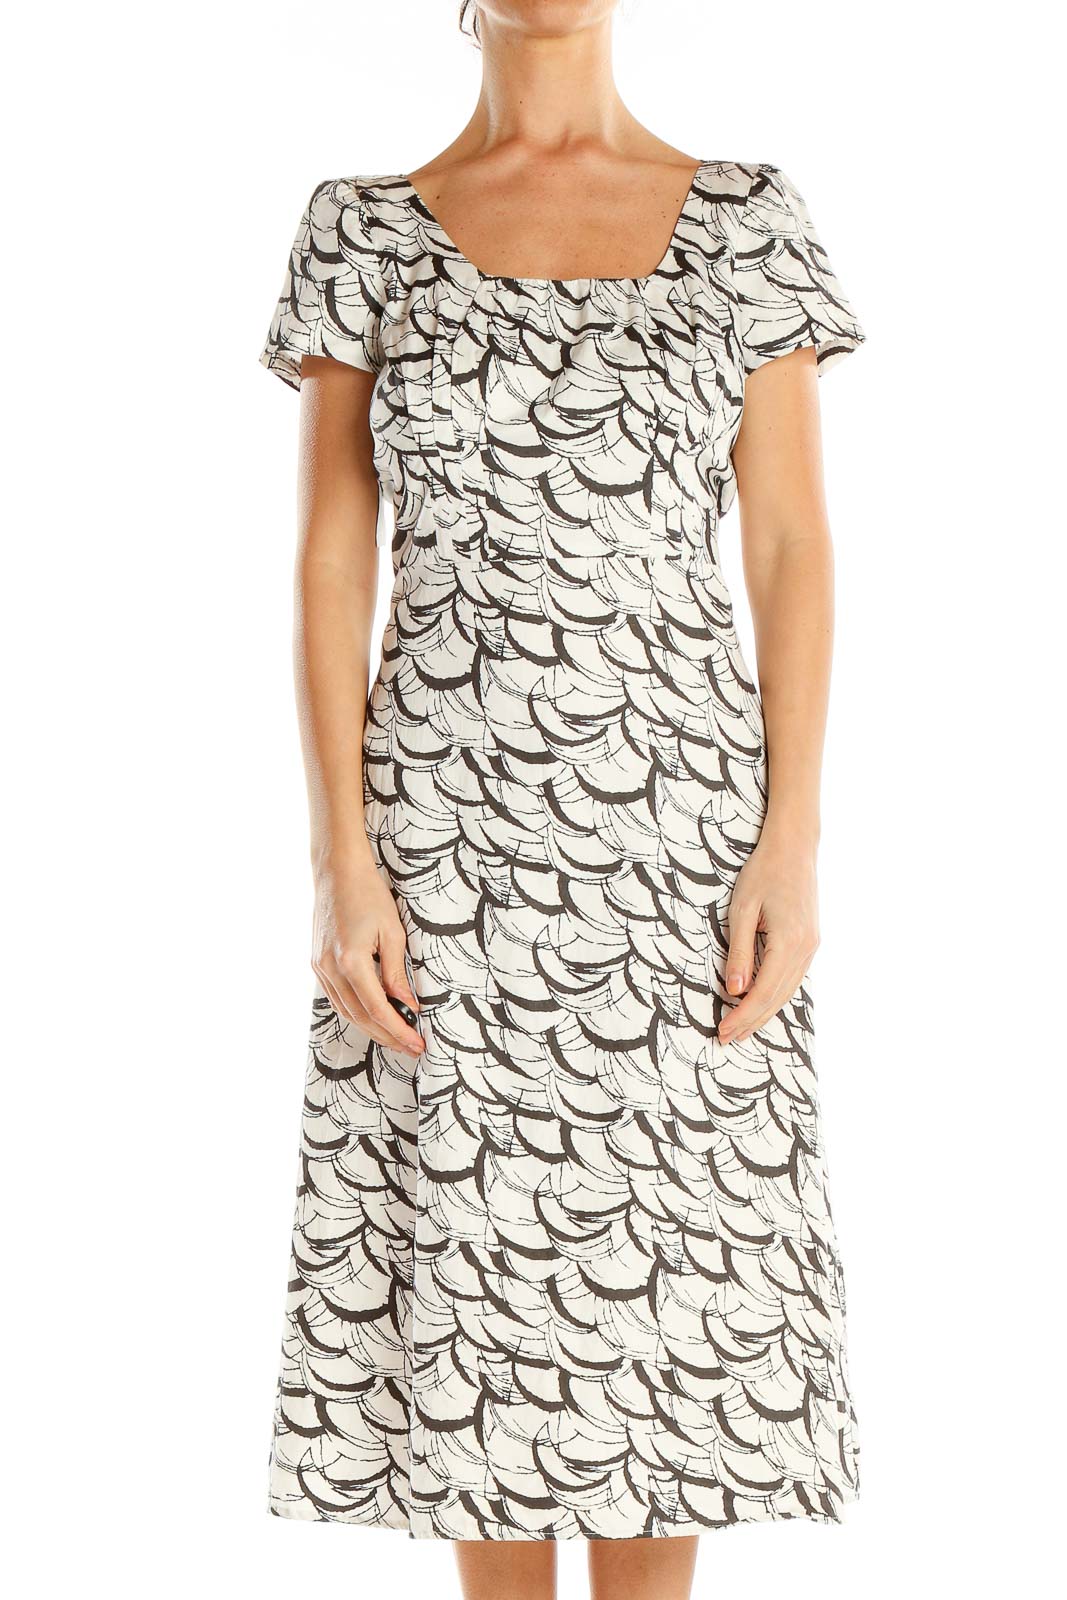 White Gray Printed A-Line Dress Front